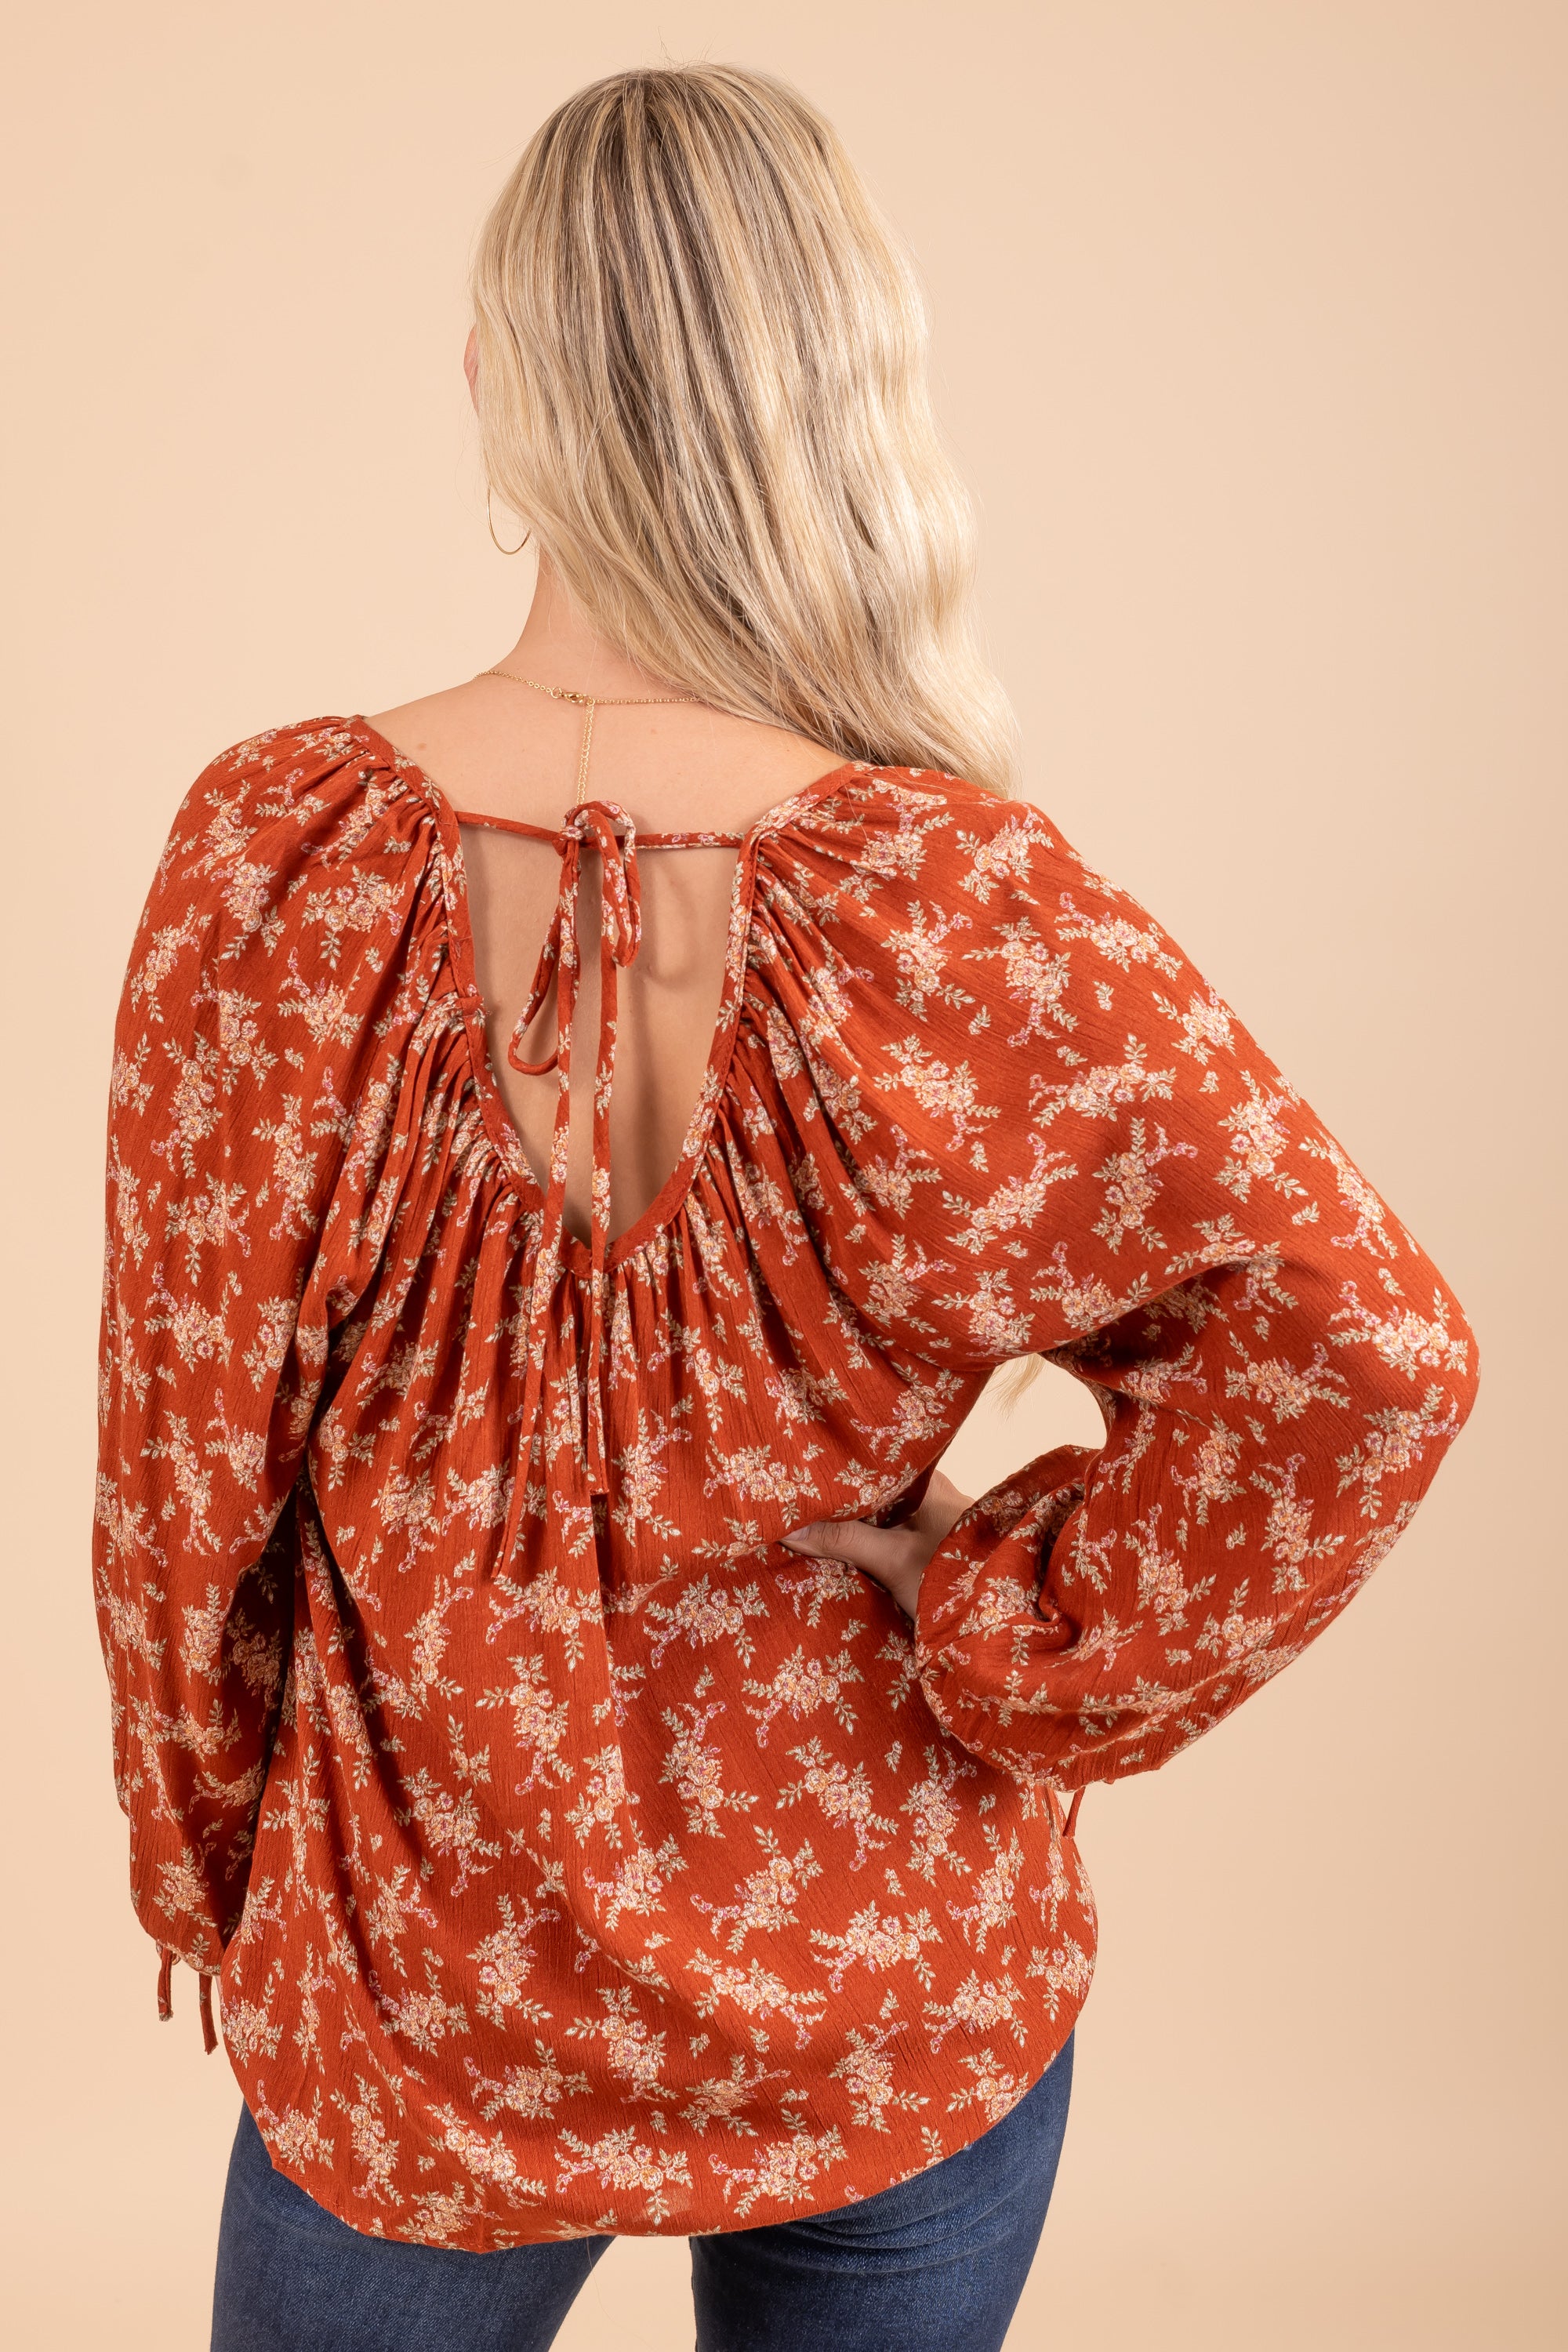 Floral v-neck rayon top with tied end long-sleeves